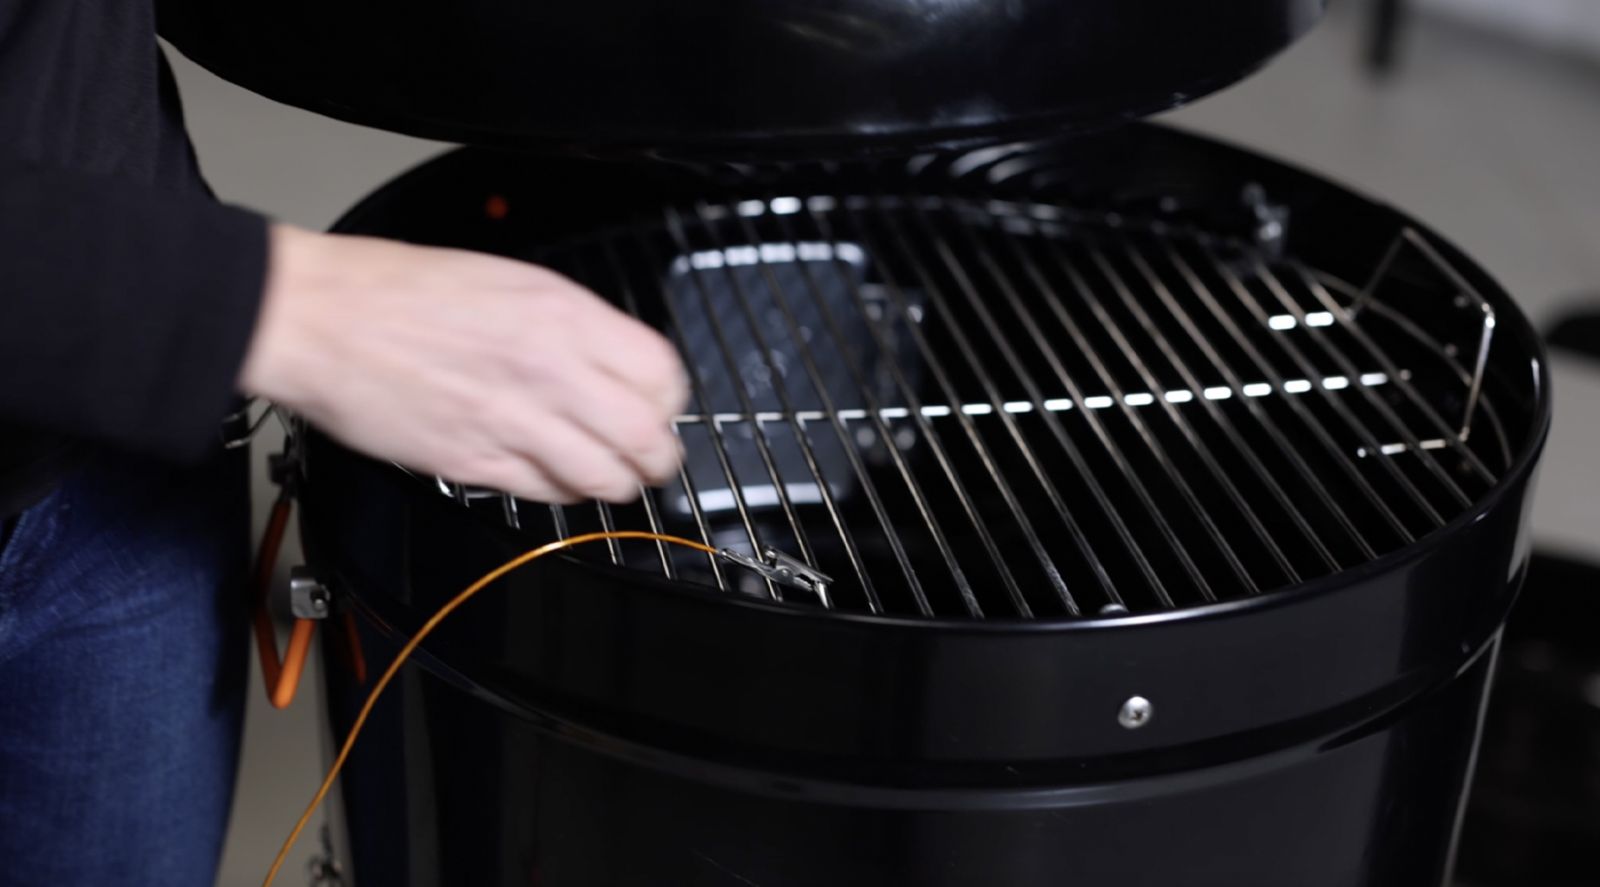 This image shows a fan controller inserted into the grill.